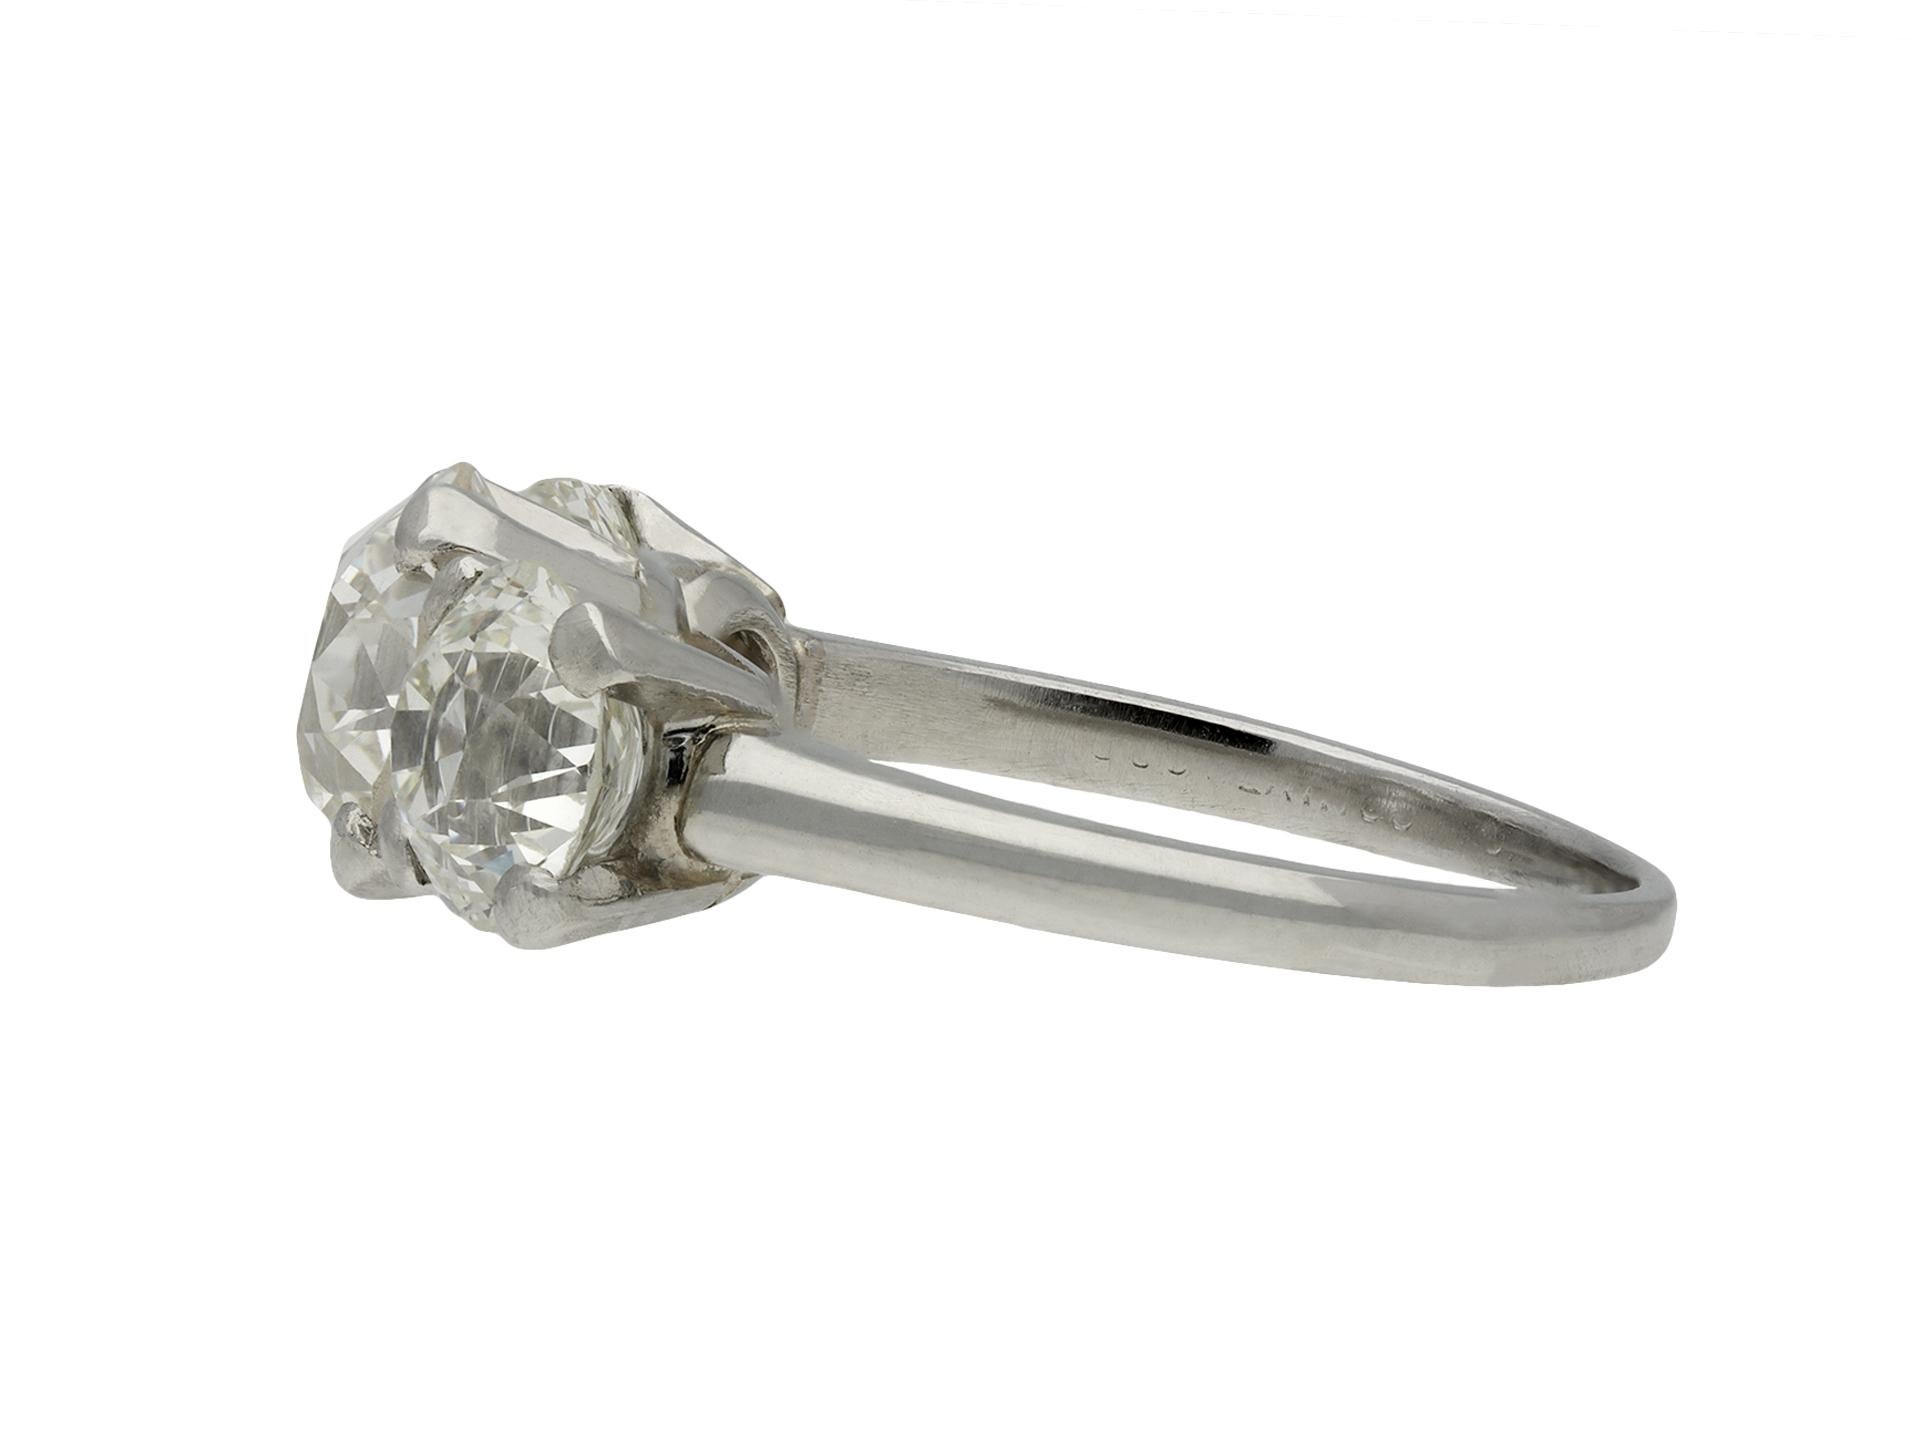 Jabel old cut diamond three stone ring. Set centrally with a round old cut diamond in an open back claw setting with an approximate weight of 1.45 carats, flanked further with two round old cut diamonds in open back claw settings with a combined